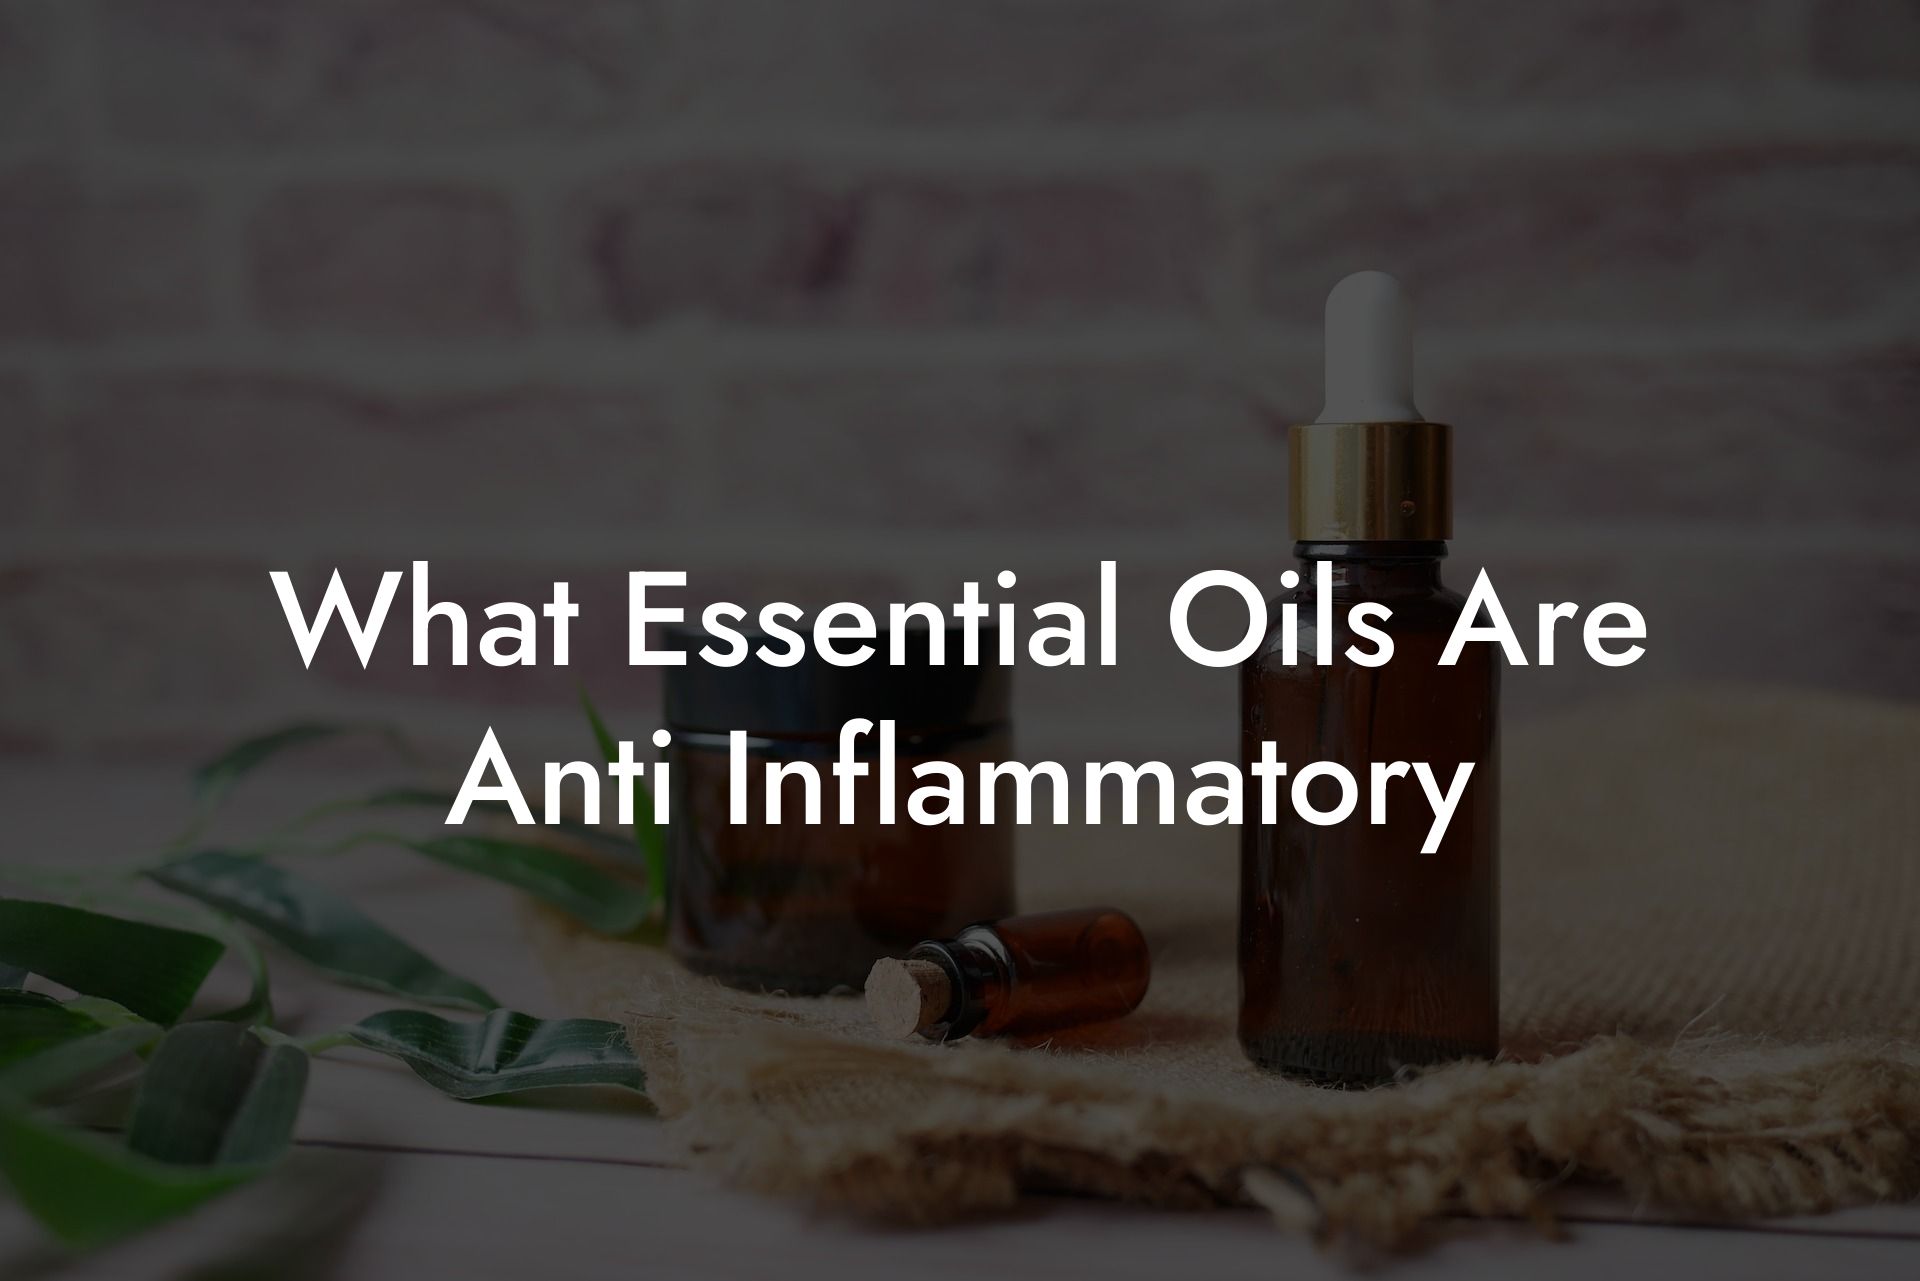 What Essential Oils Are Anti Inflammatory